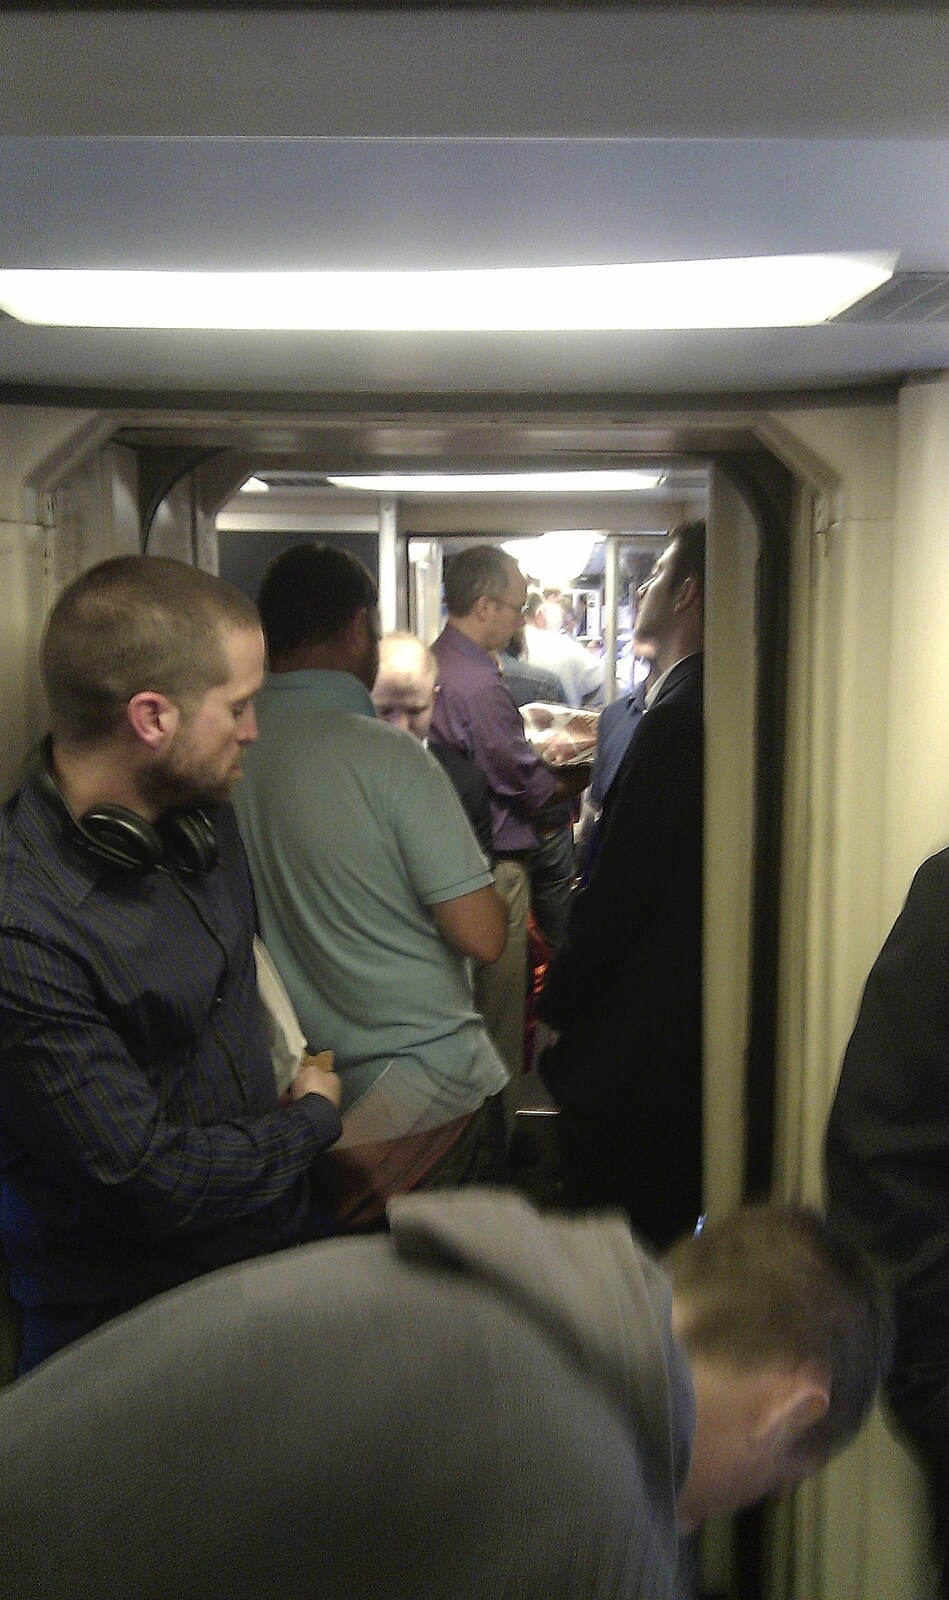 It's standing-room only on the train back from On the Rails, and a Kebab, Stratford and Diss, Norfolk - 31st July 2011